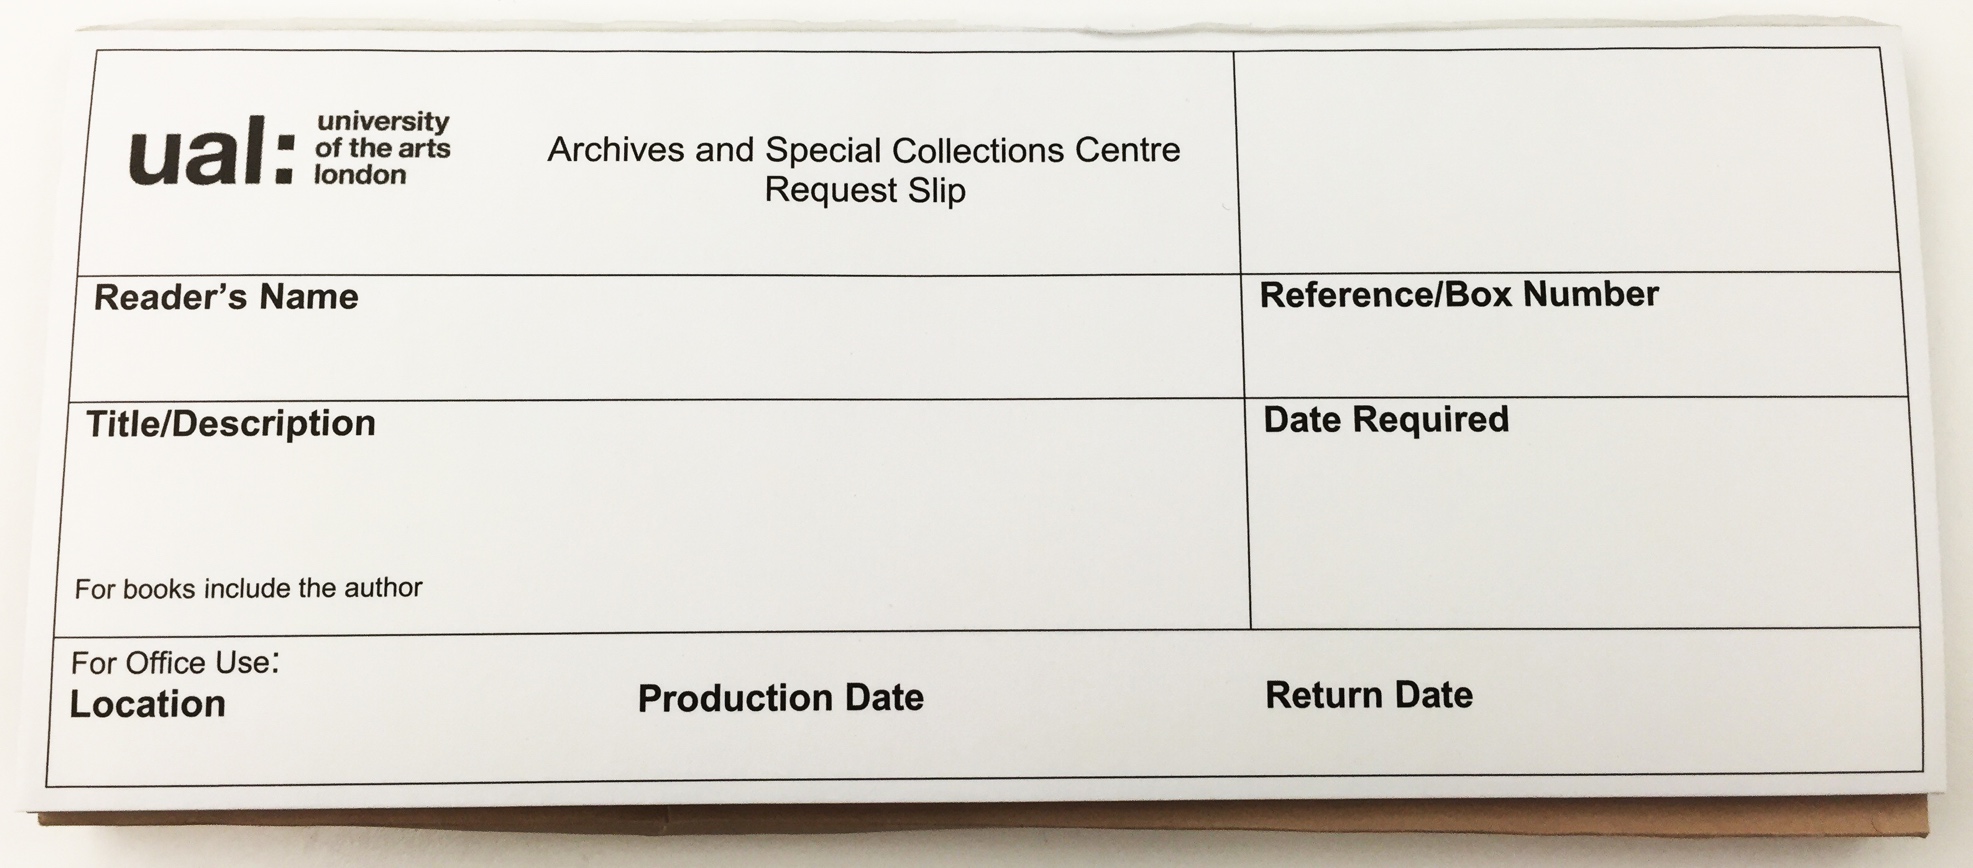 ASCC slip book, used for researchers to request archive material.